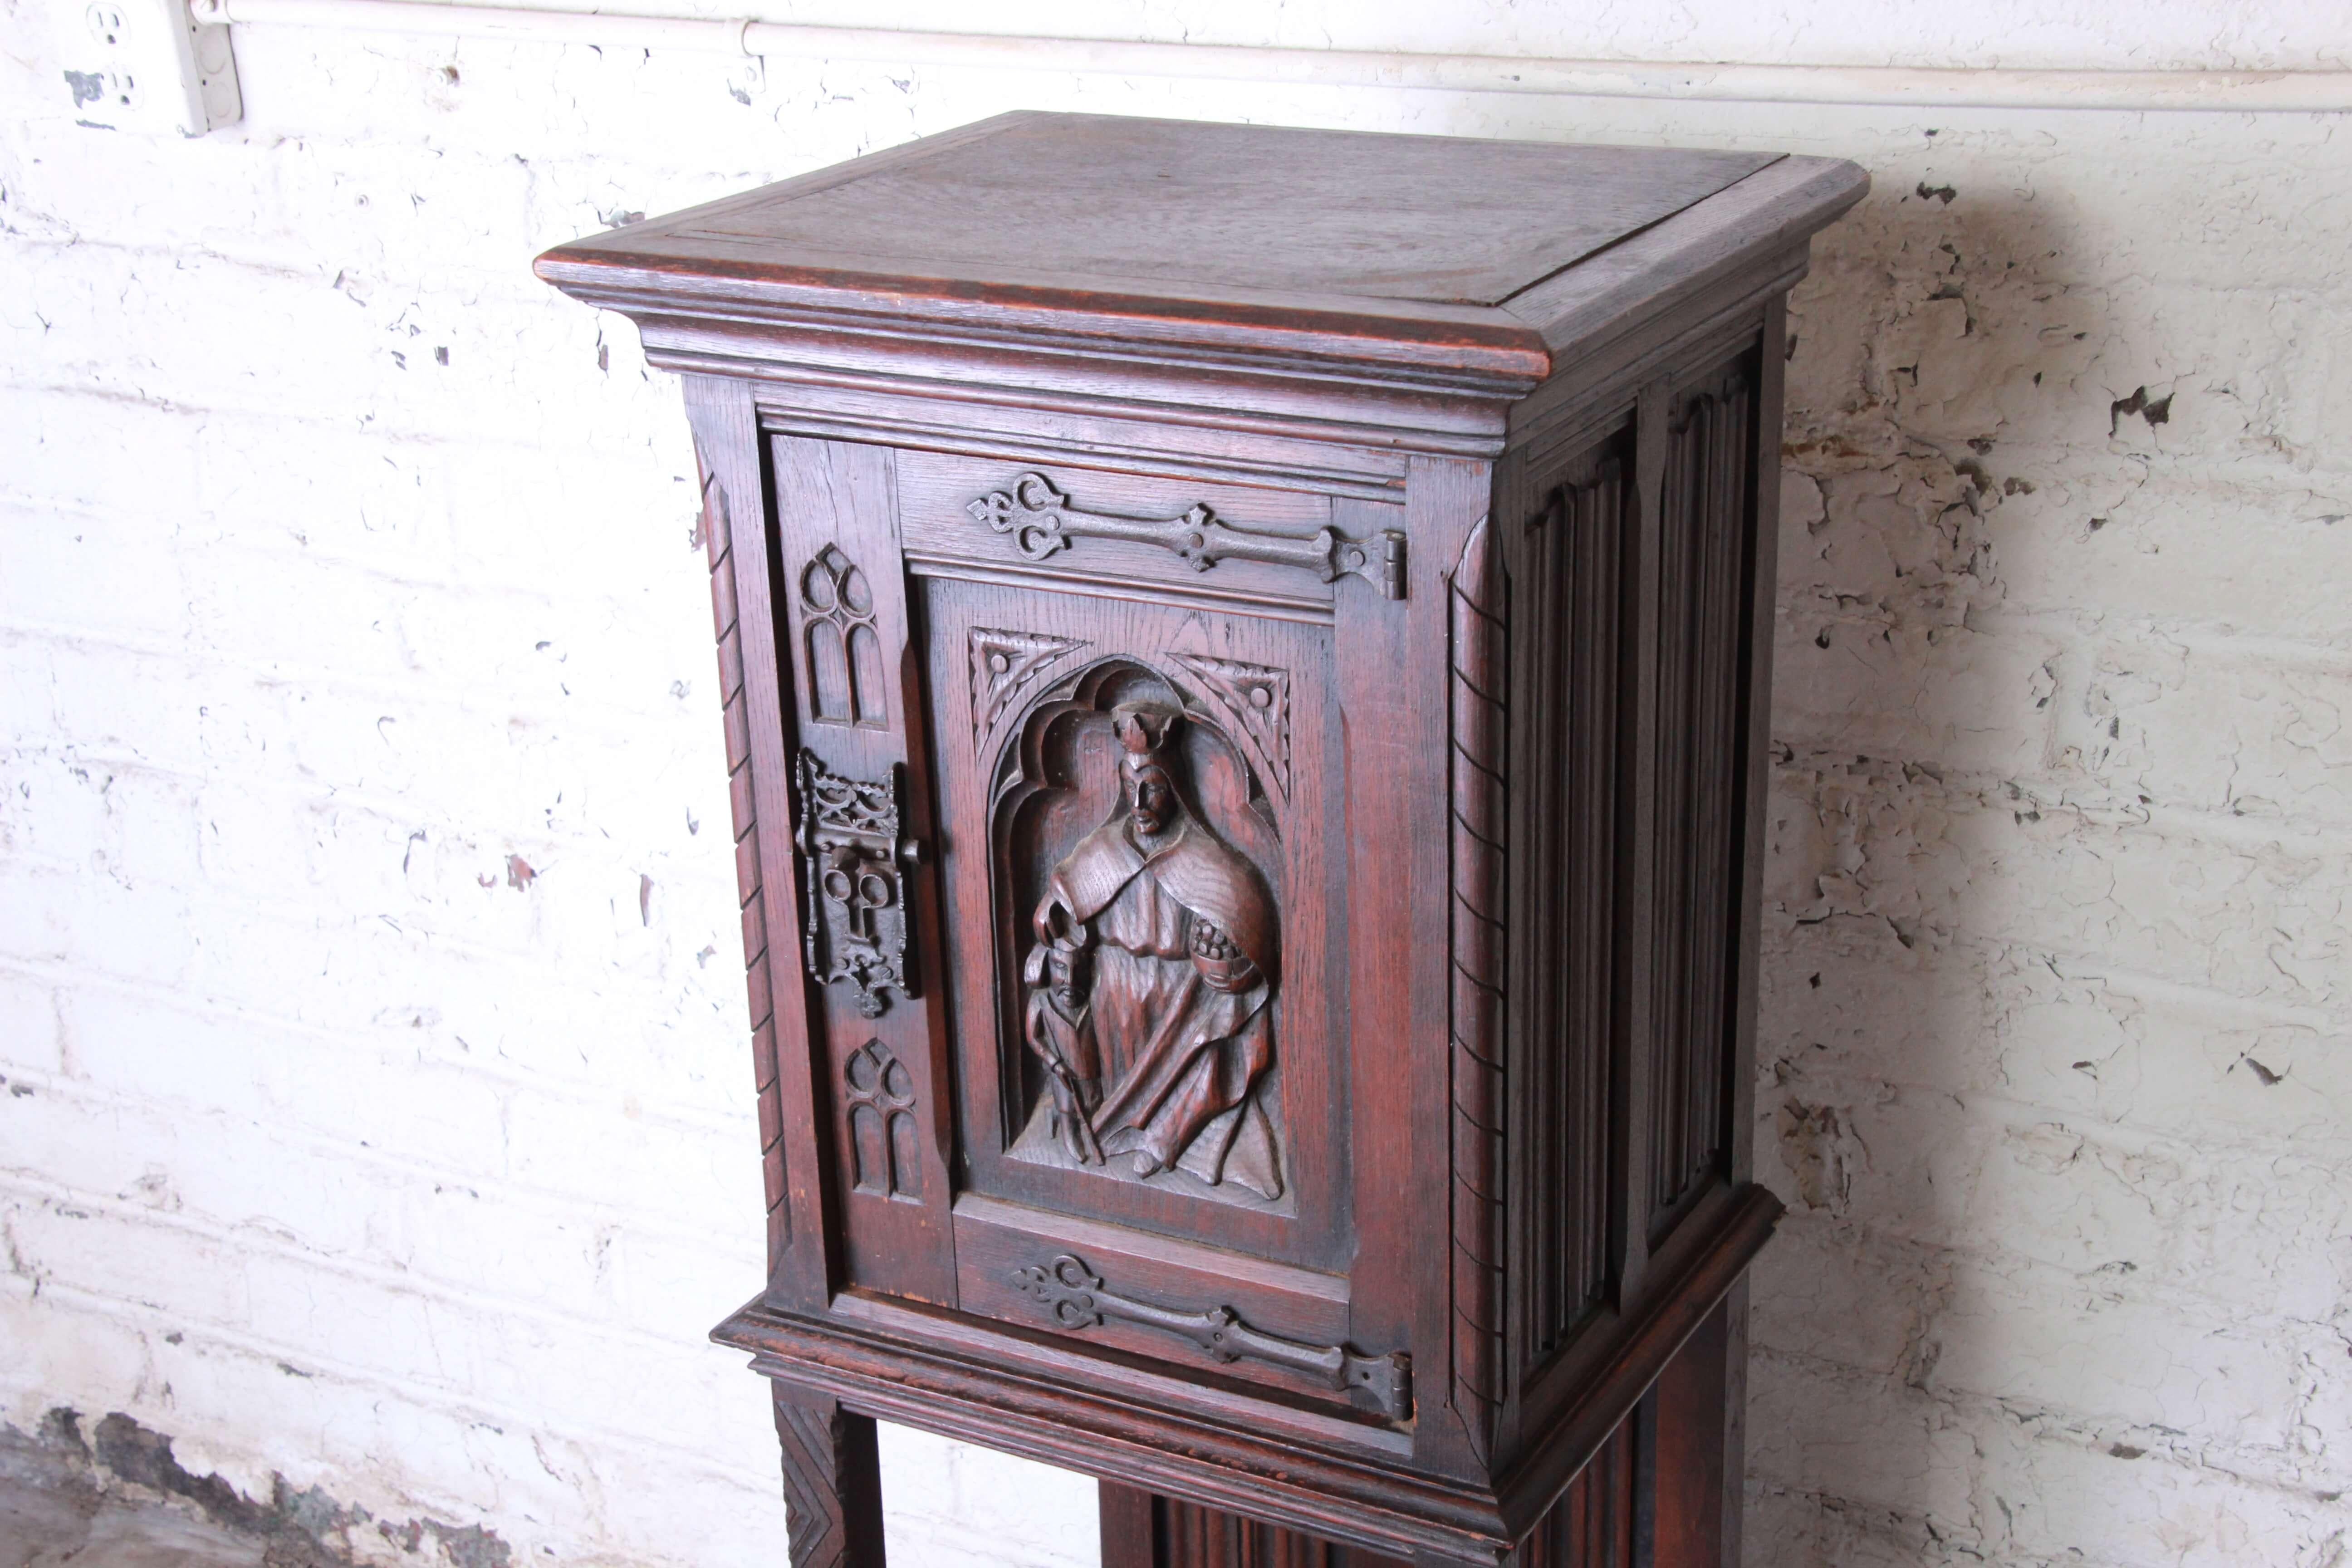 Offering a very nice 19th century Belgian dark walnut gothic bar cabinet. The cabinet has a carved religious figure giving it a unique style as a liquor cabinet or storage cabinet. The piece is for the mid-19th century and marked made in Belgium on